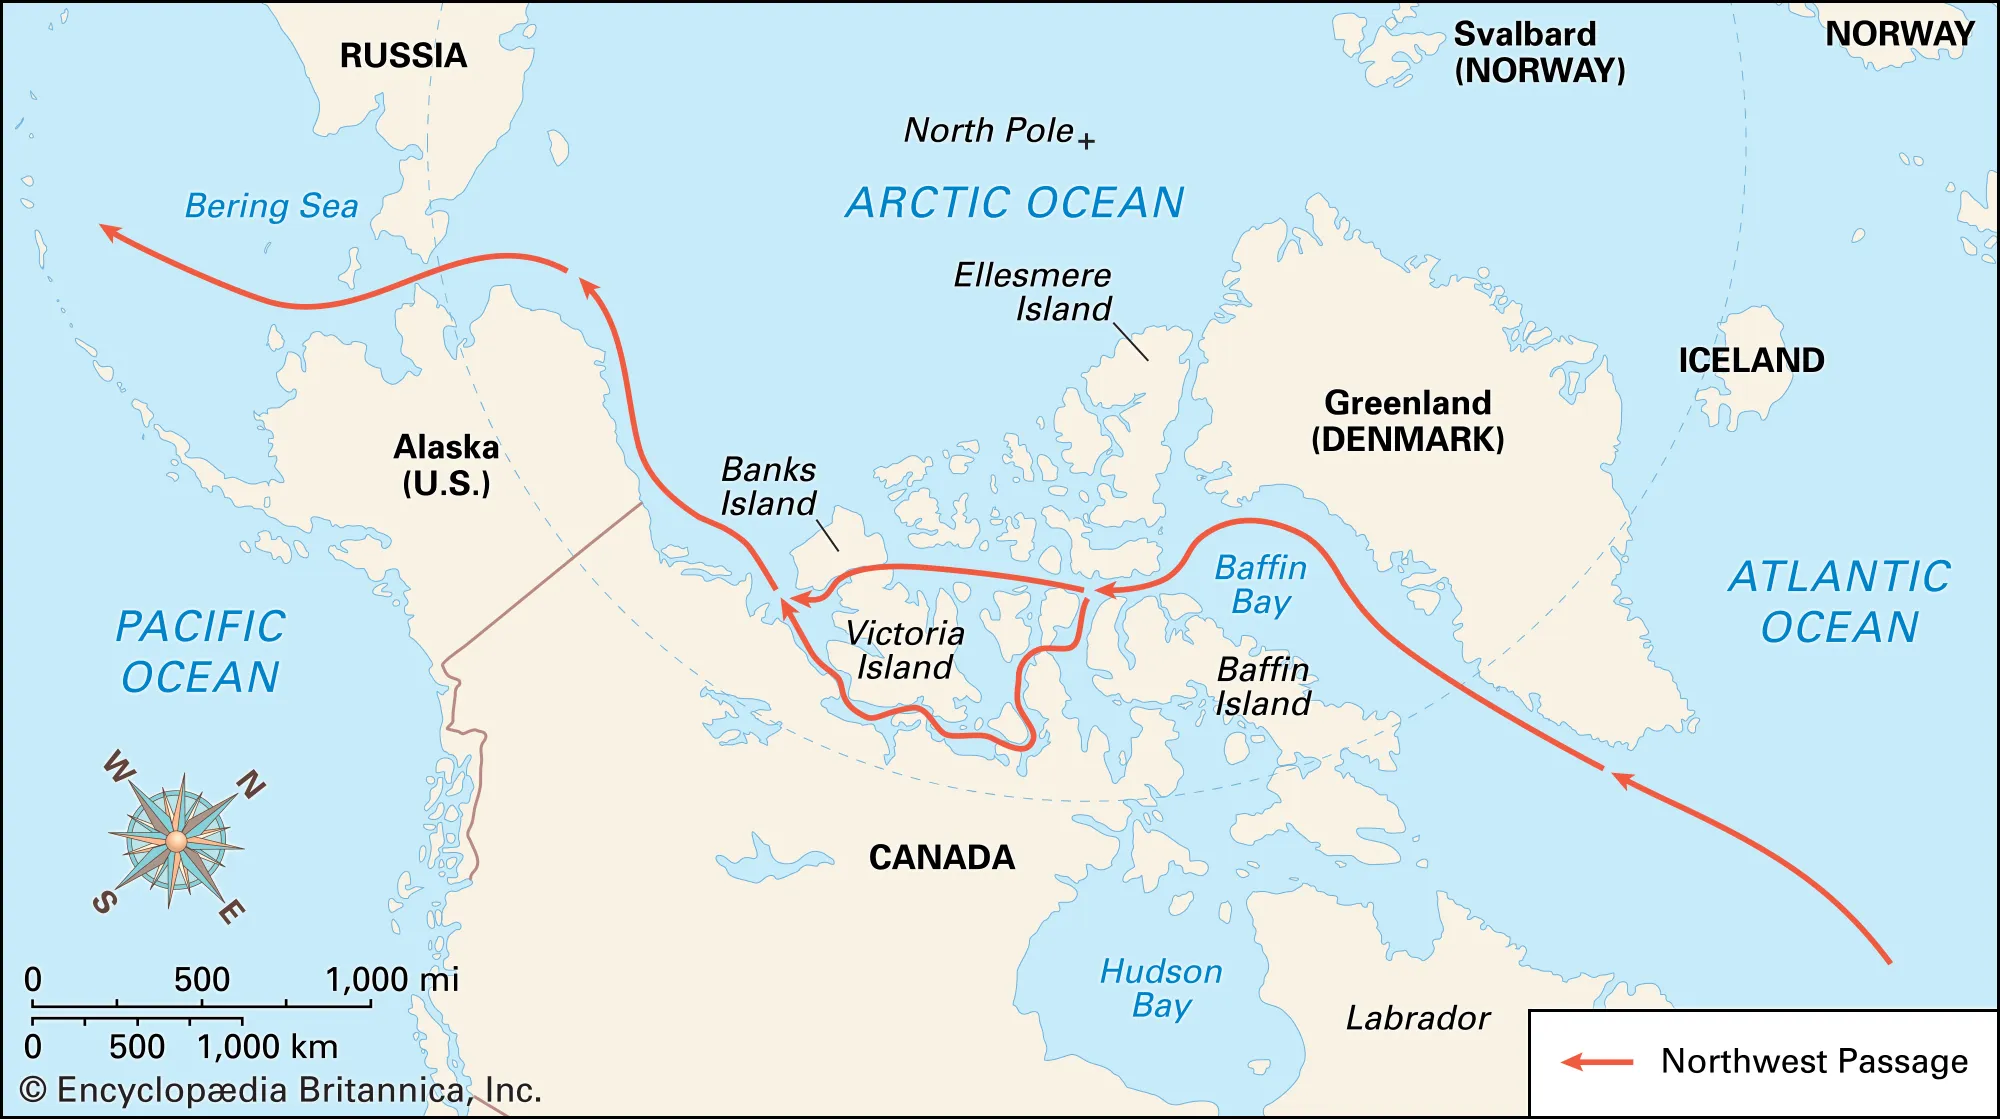 <ul><li><p>Until recently, sea ice made the Arctic Ocean impassable to shipping</p></li><li><p>In 2014 the first cargo ship, unescorted by an ice-breaking vessel, sailed through the <mark data-color="blue">North West Passage (NWP)</mark></p></li><li><p>Shipping companies could significantly reduce their shipping time and costs by travelling through the NWP</p></li><li><p>Using the Northern Sea Route (NSR), the distance between East Asia and Europe would be significantly reduced</p></li><li><p>The trip from Tokyo to the Netherlands would be reduced from <mark data-color="yellow">21,000 to 13,000 km</mark></p></li><li><p>However there is a high fuel cost of sailing through sea ice</p></li><li><p>Also have to pay for an ice breaker ship to escort the cargo ship</p></li><li><p><mark data-color="yellow">By 2025, 200-300 ships</mark> are projected to operate in the Arctic Ocean</p></li></ul>